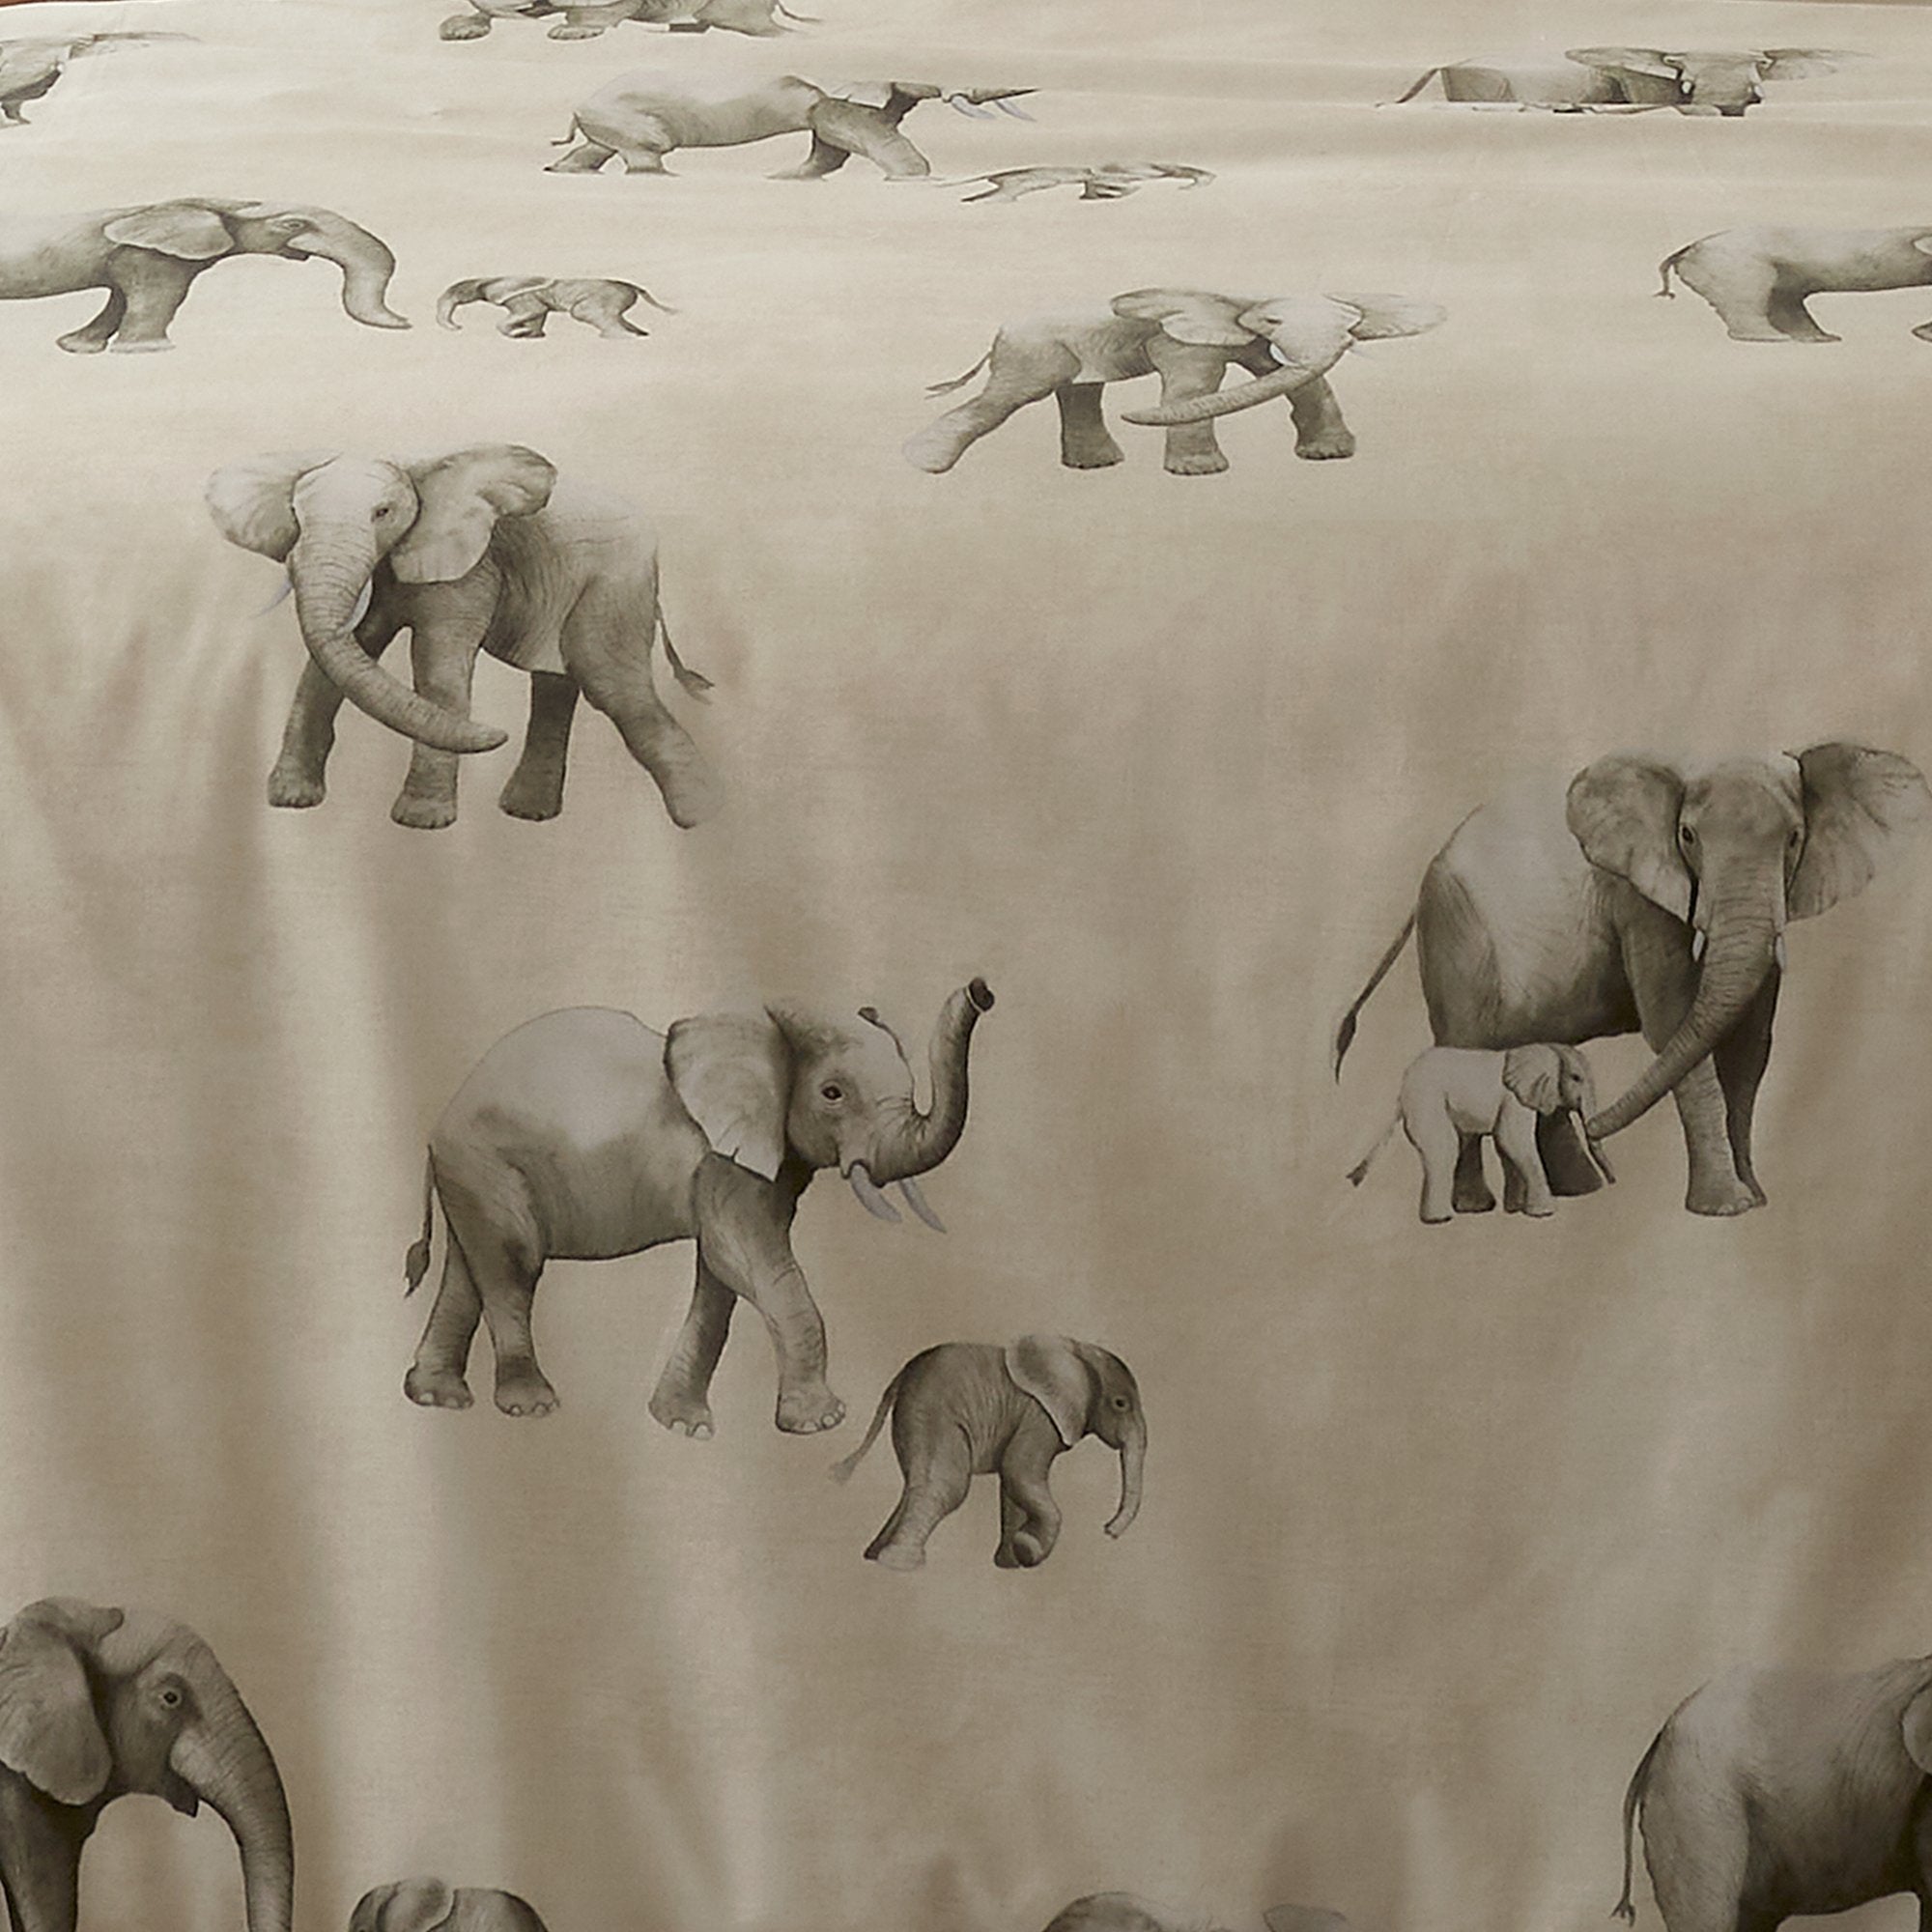 Duvet Cover Set Ella the Elephant by Fusion in Natural